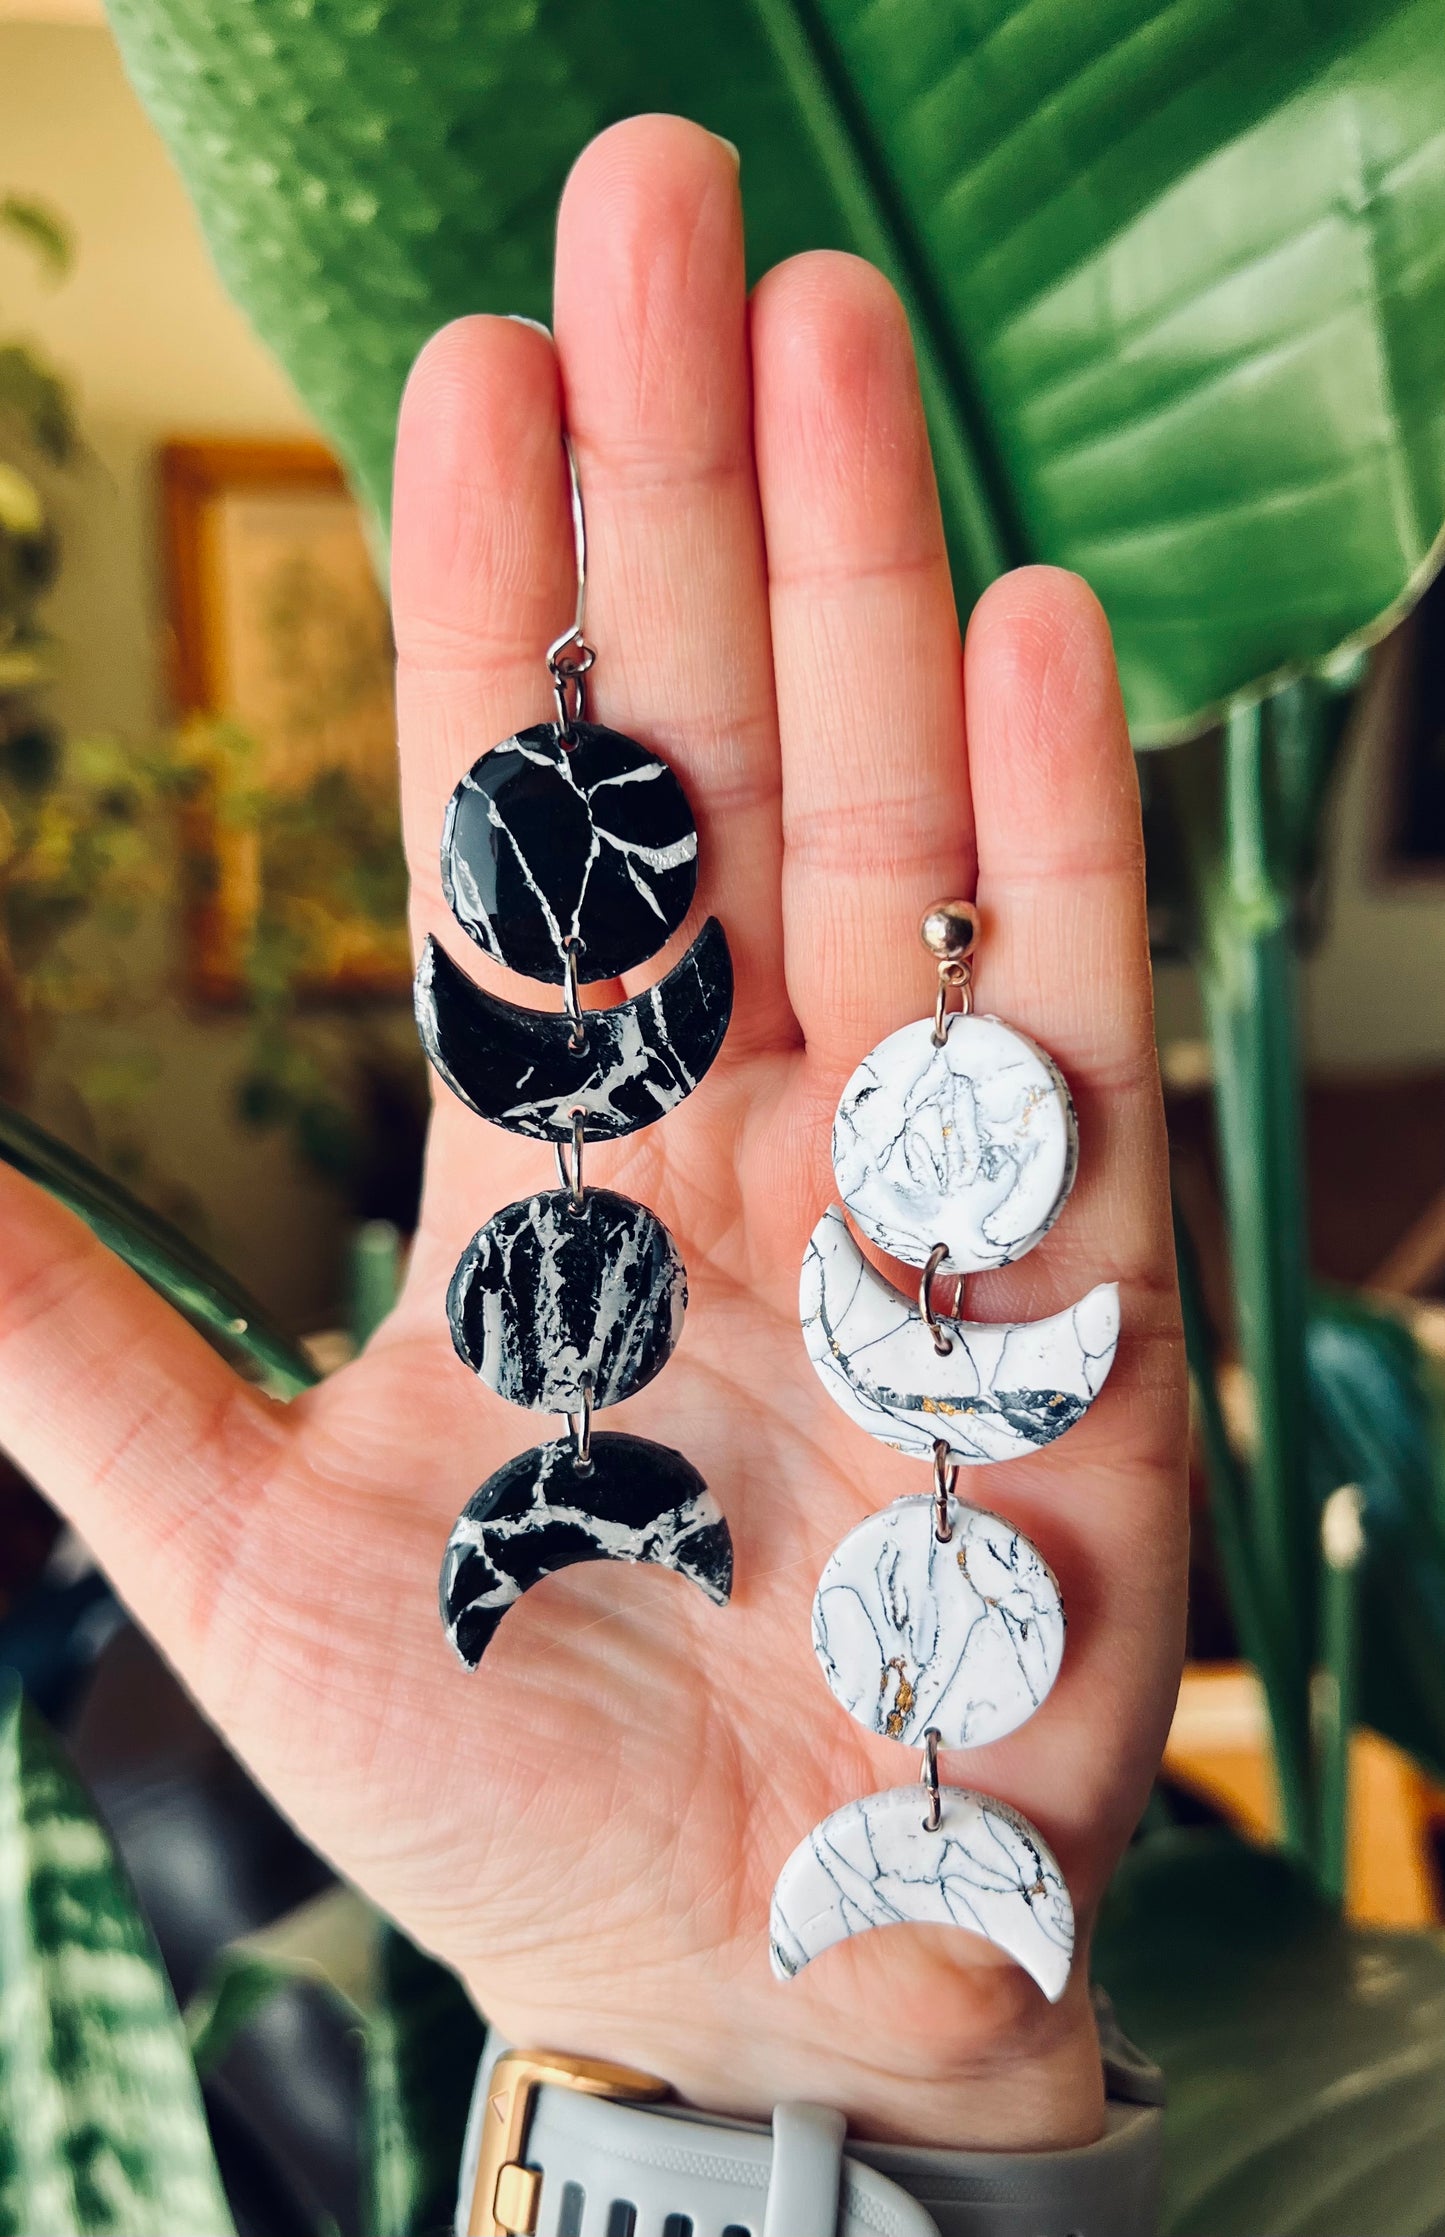 Yin & Yang moon phase earrings. Embrace the elegance of lunar phases with our unique polymer clay white moon earrings, inspired by the ever-changing cycles of the moon